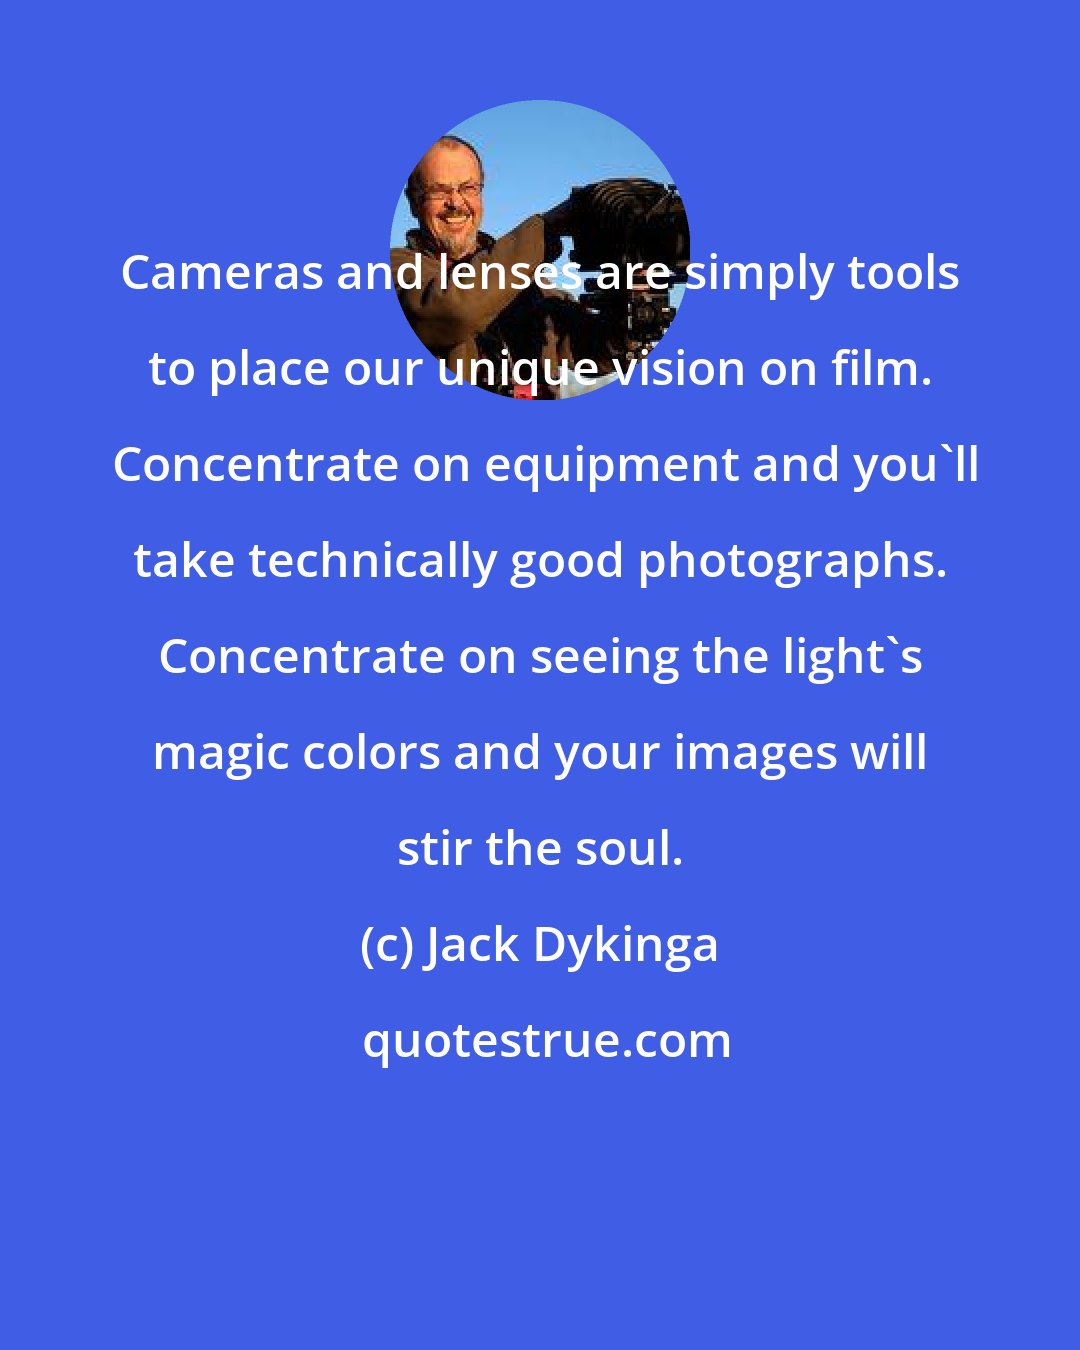 Jack Dykinga: Cameras and lenses are simply tools to place our unique vision on film.  Concentrate on equipment and you'll take technically good photographs. Concentrate on seeing the light's magic colors and your images will stir the soul.